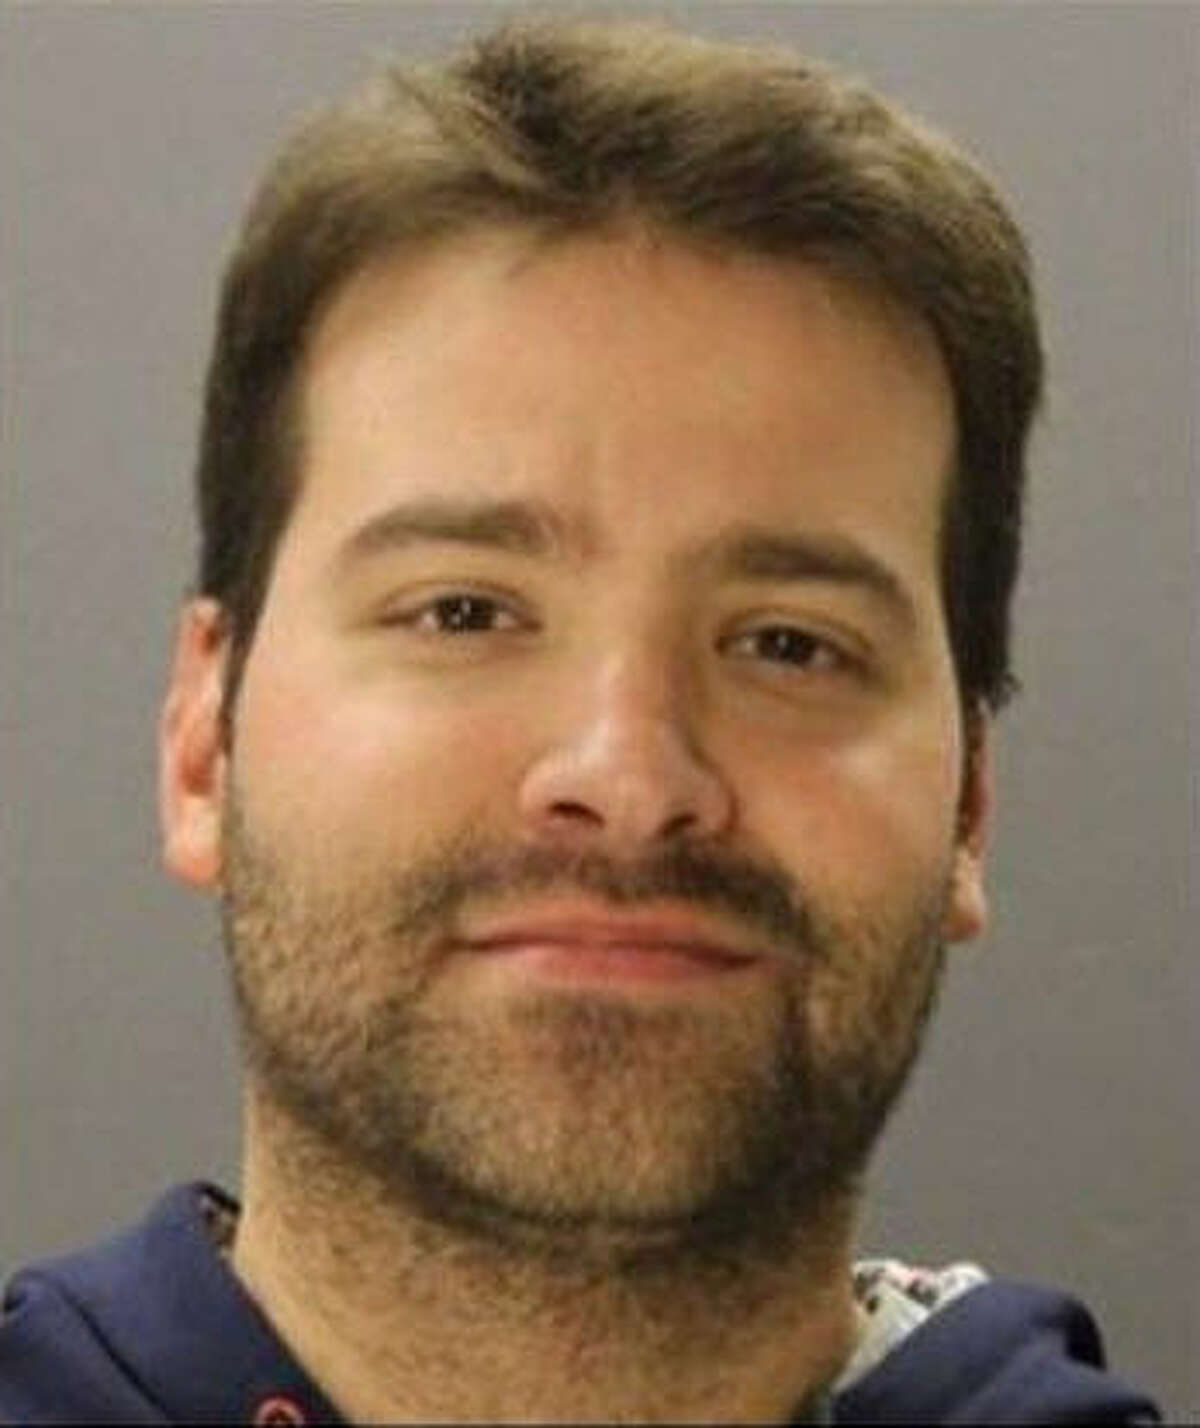 Omar Alanis, 29, was a world history teacher at a Dallas ISD school and police say he threatened to kill his staff if they didn't give him a raise. This is the perfect example of what not to do when asking for a raise, continue clicking to see the other ways you shouldn't go about asking for more money at your job.